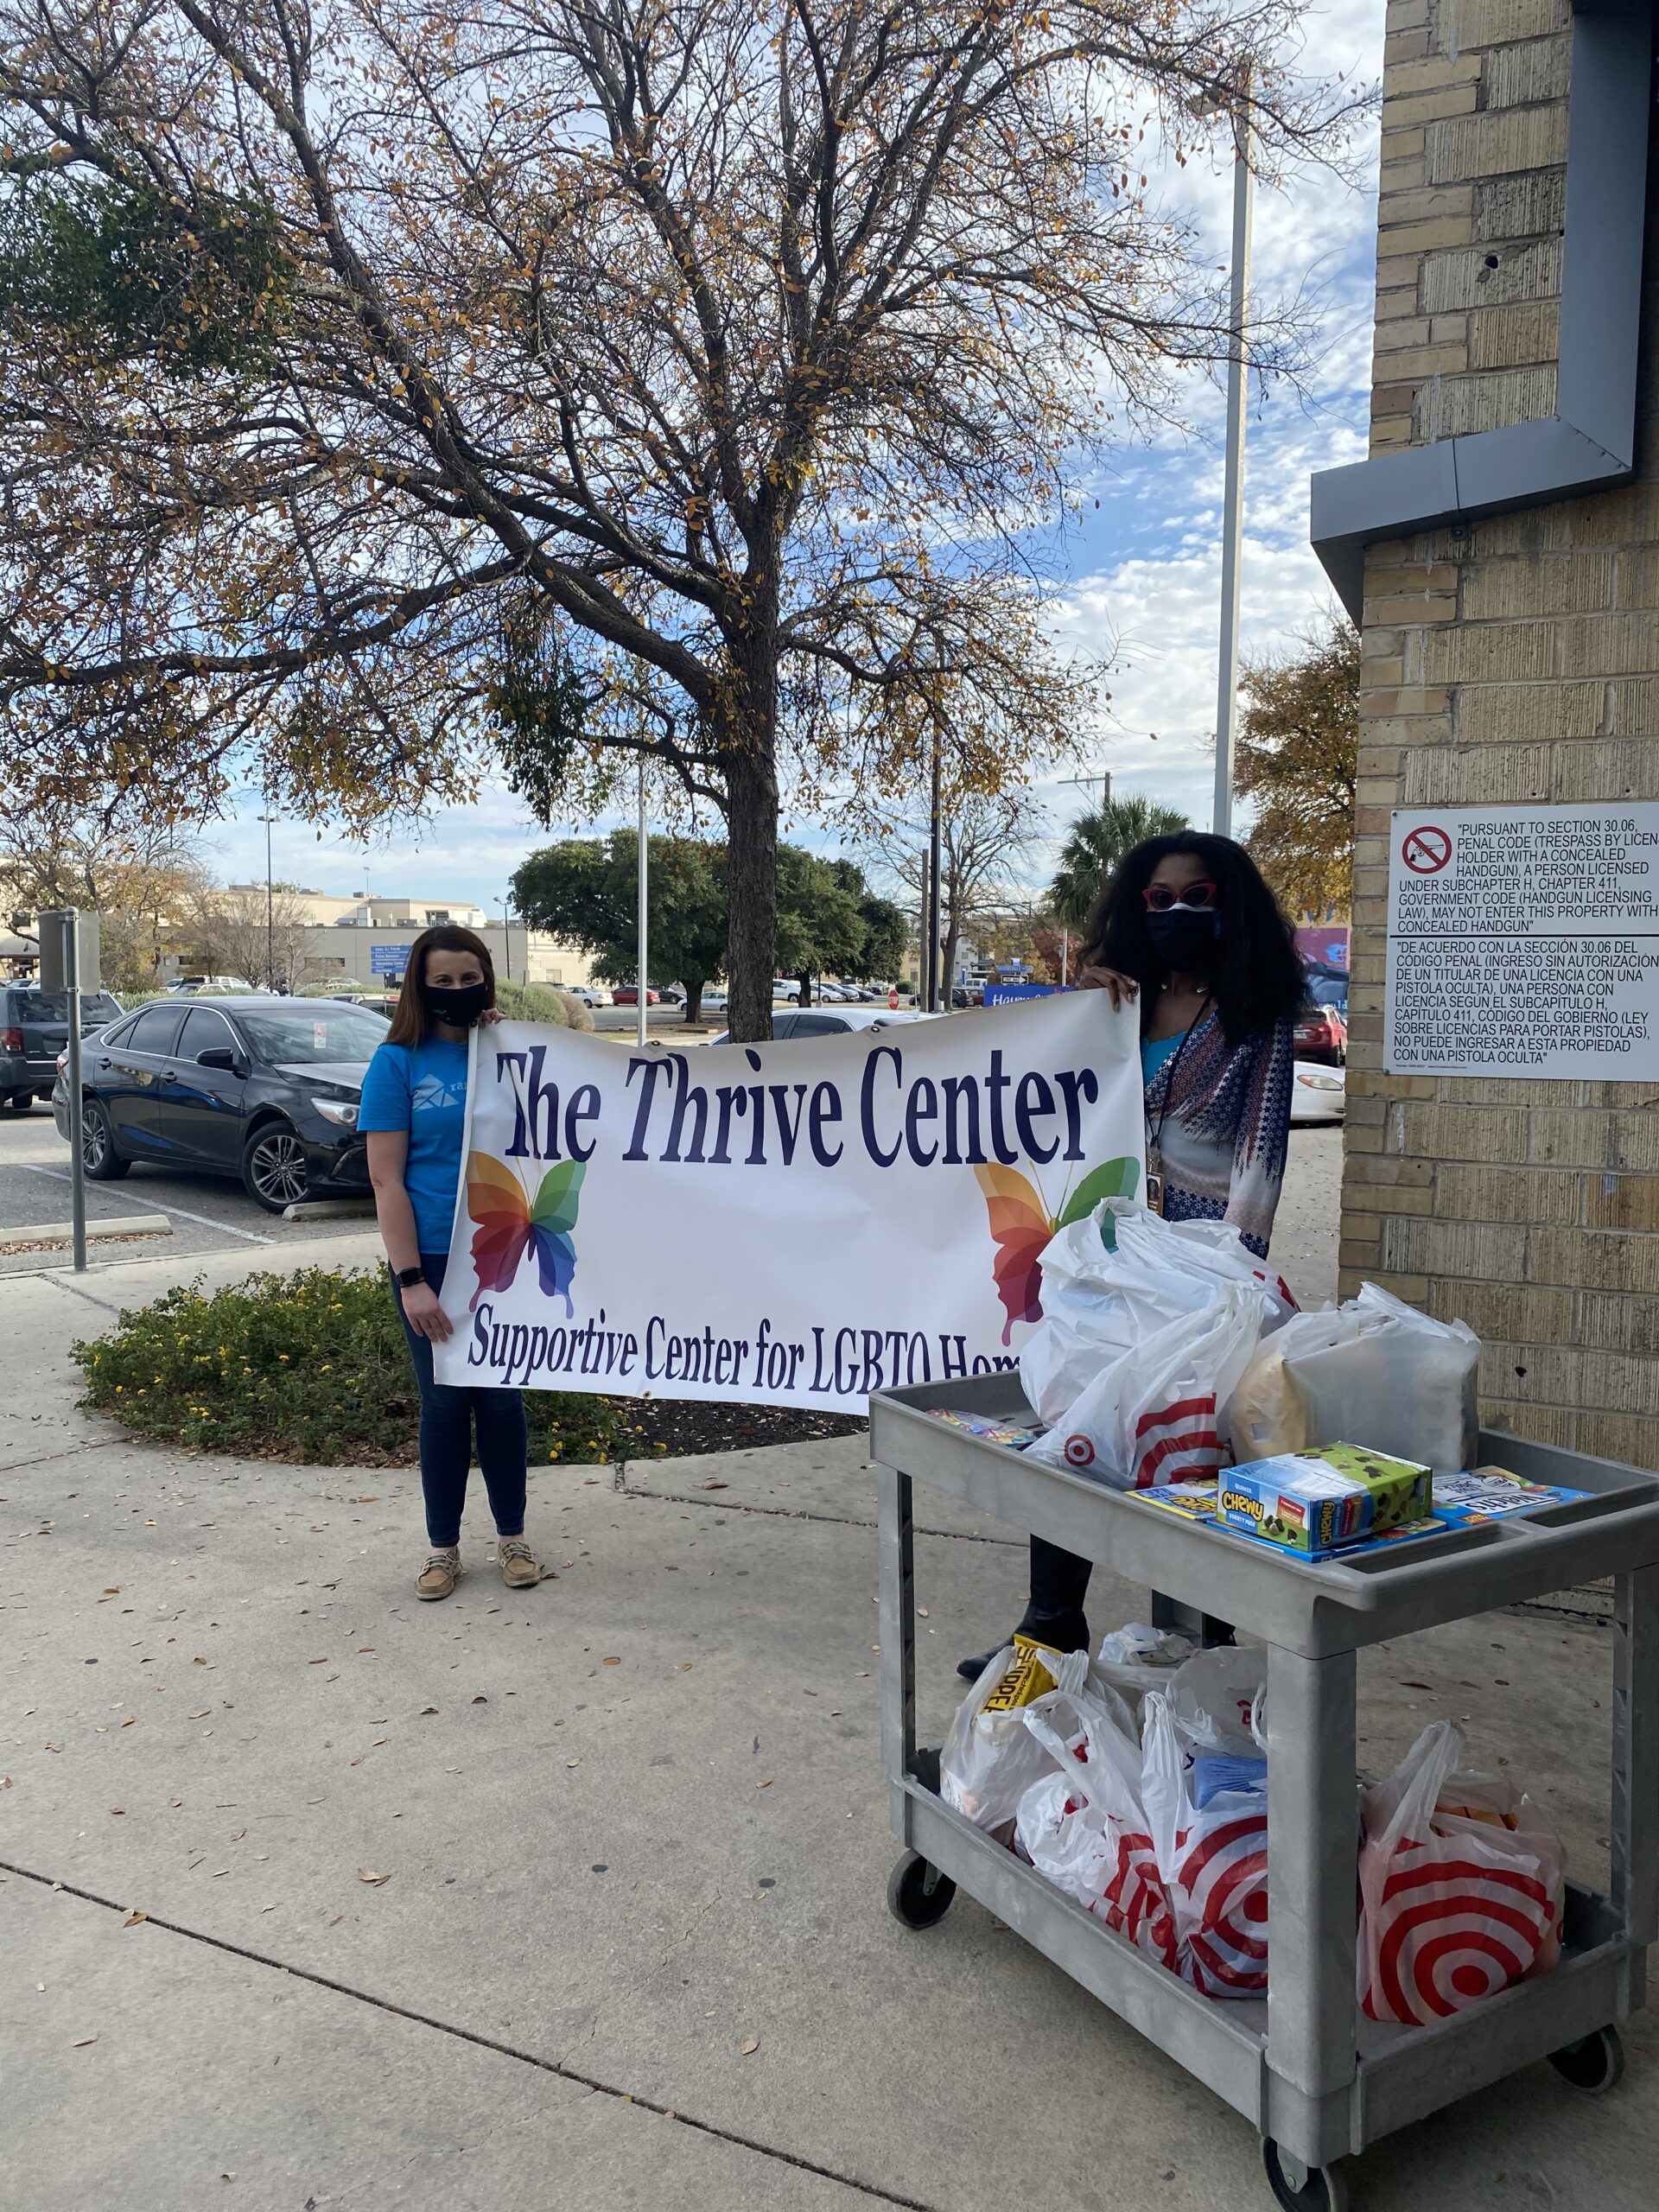 Two women stand outside holding a banner that reads "The Thrive Center" then "Supportive Center for LGBTQ" next to a cart with shopping bags full of items. 